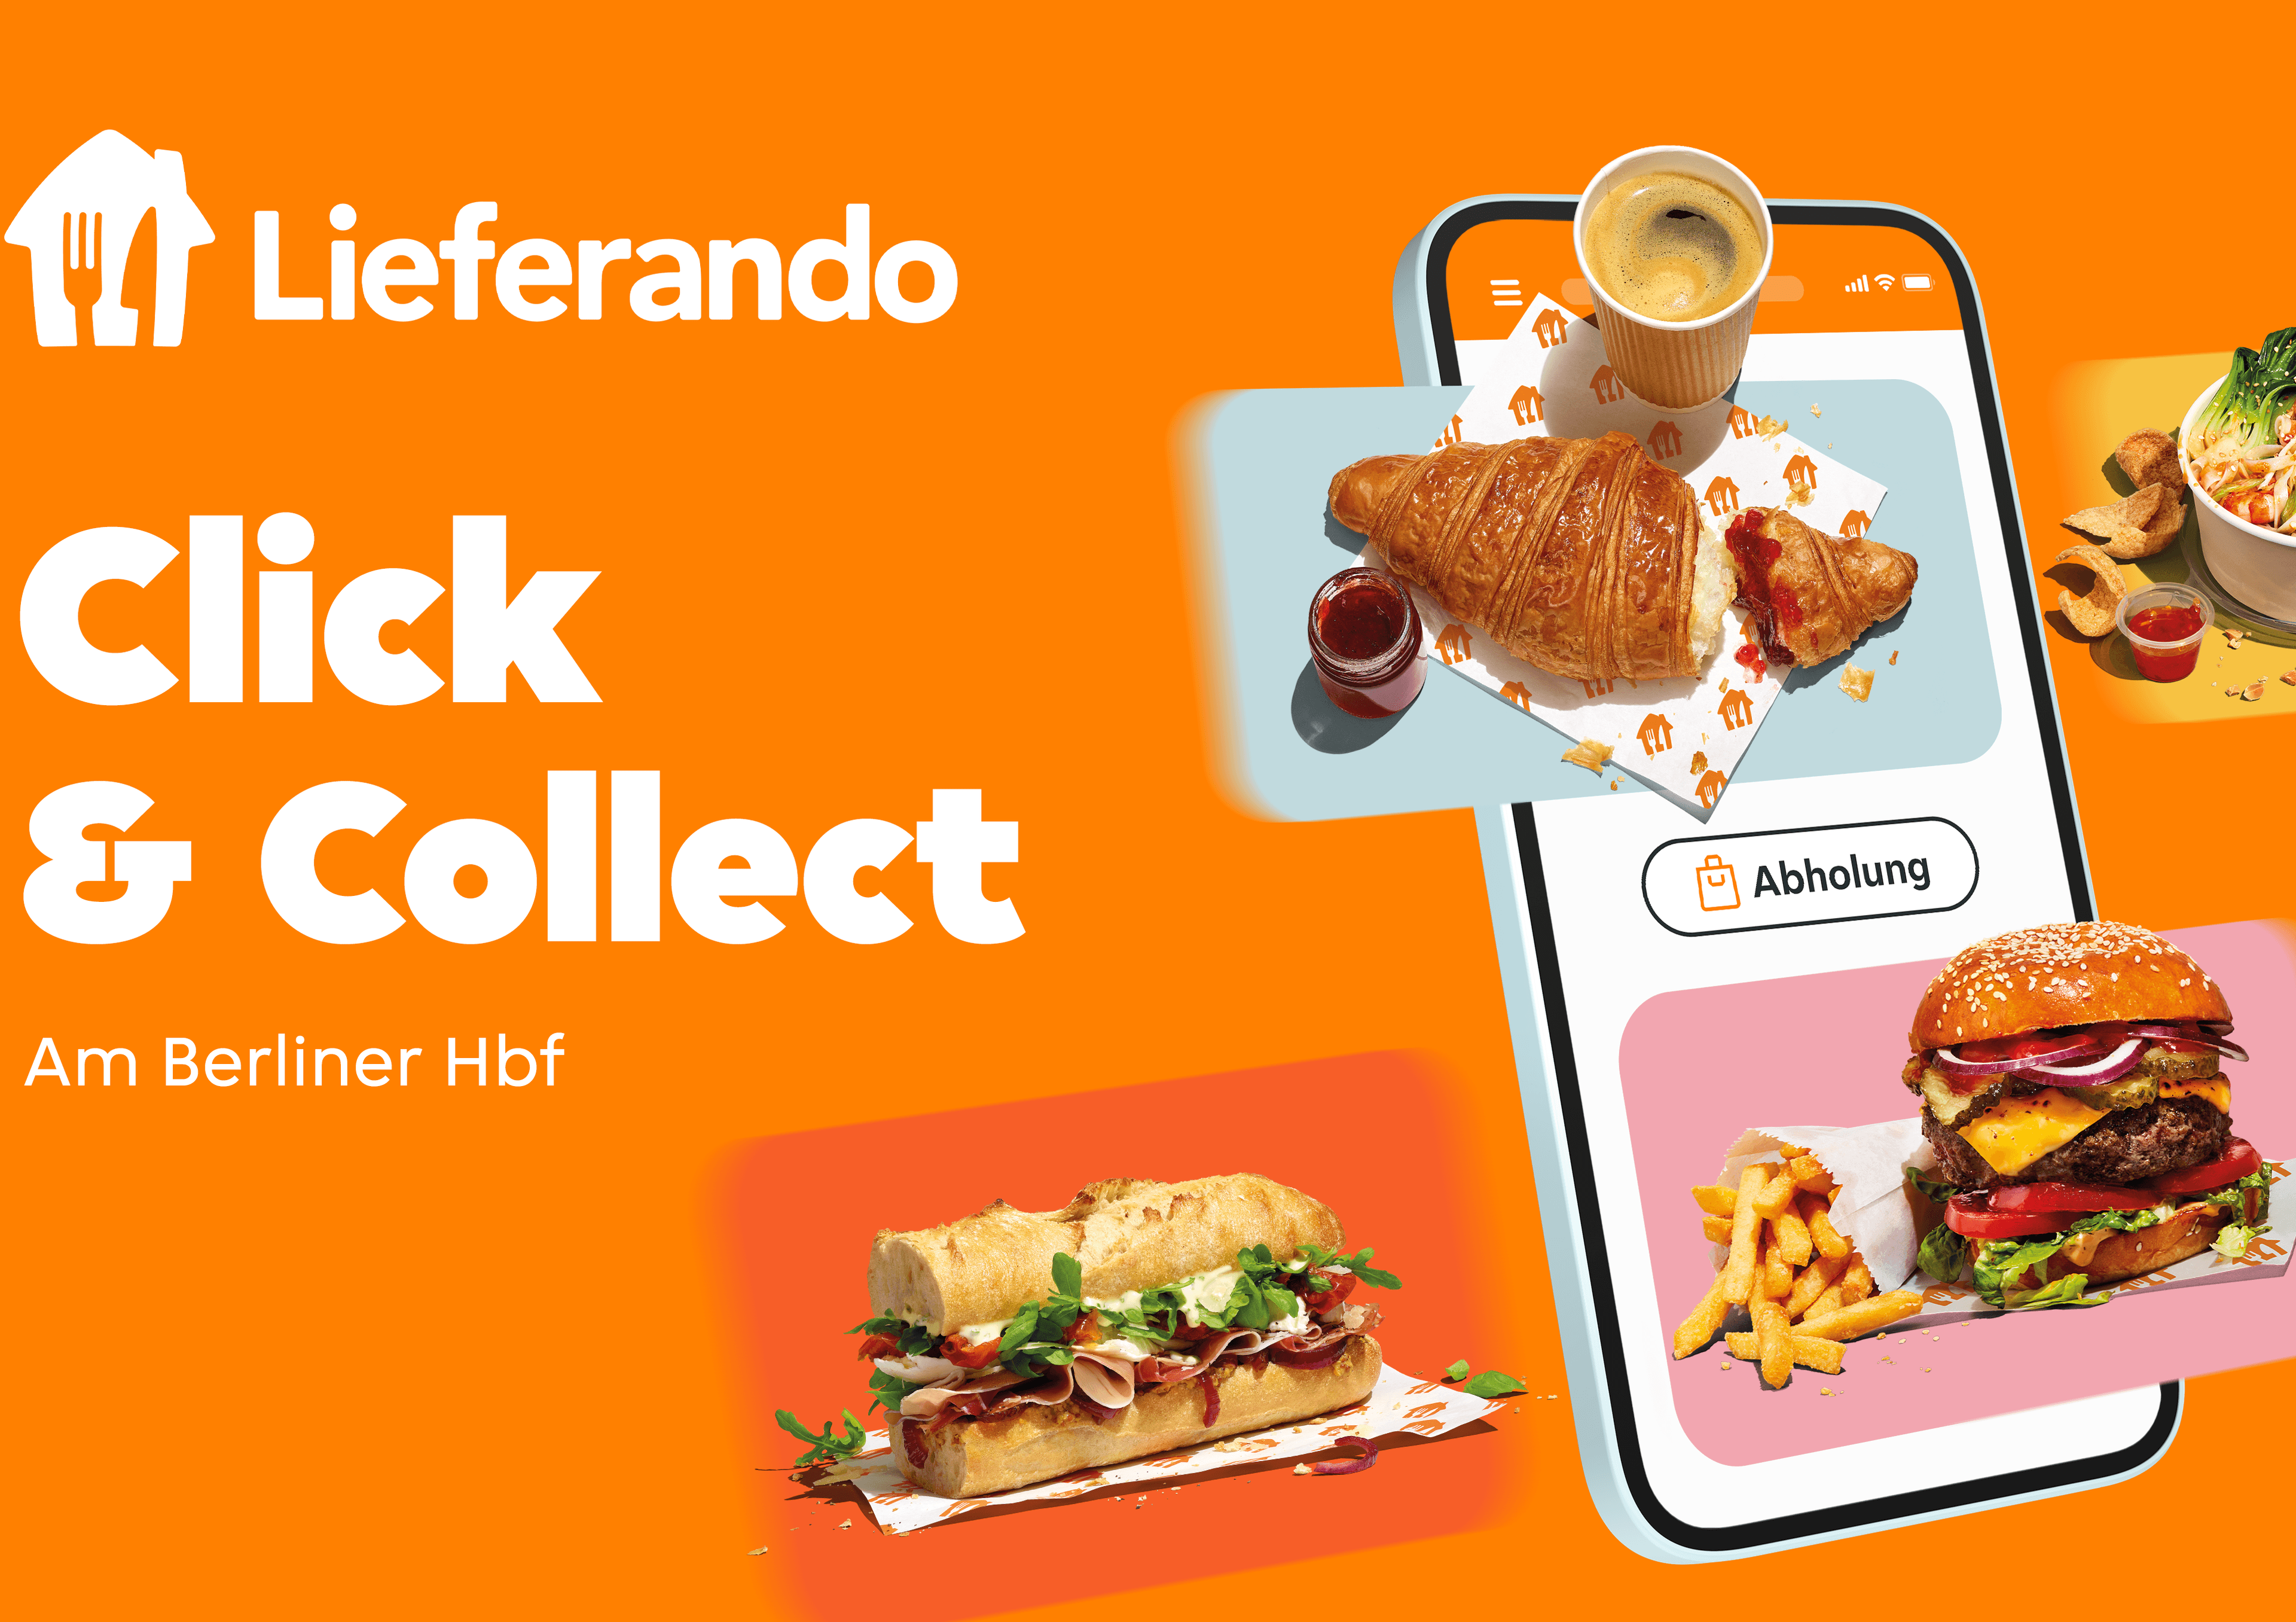 Lieferando Click & Collect at Berlin Hauptbahnhof, a smartphone with pictures of different foods and the word "Abholung" written on it.